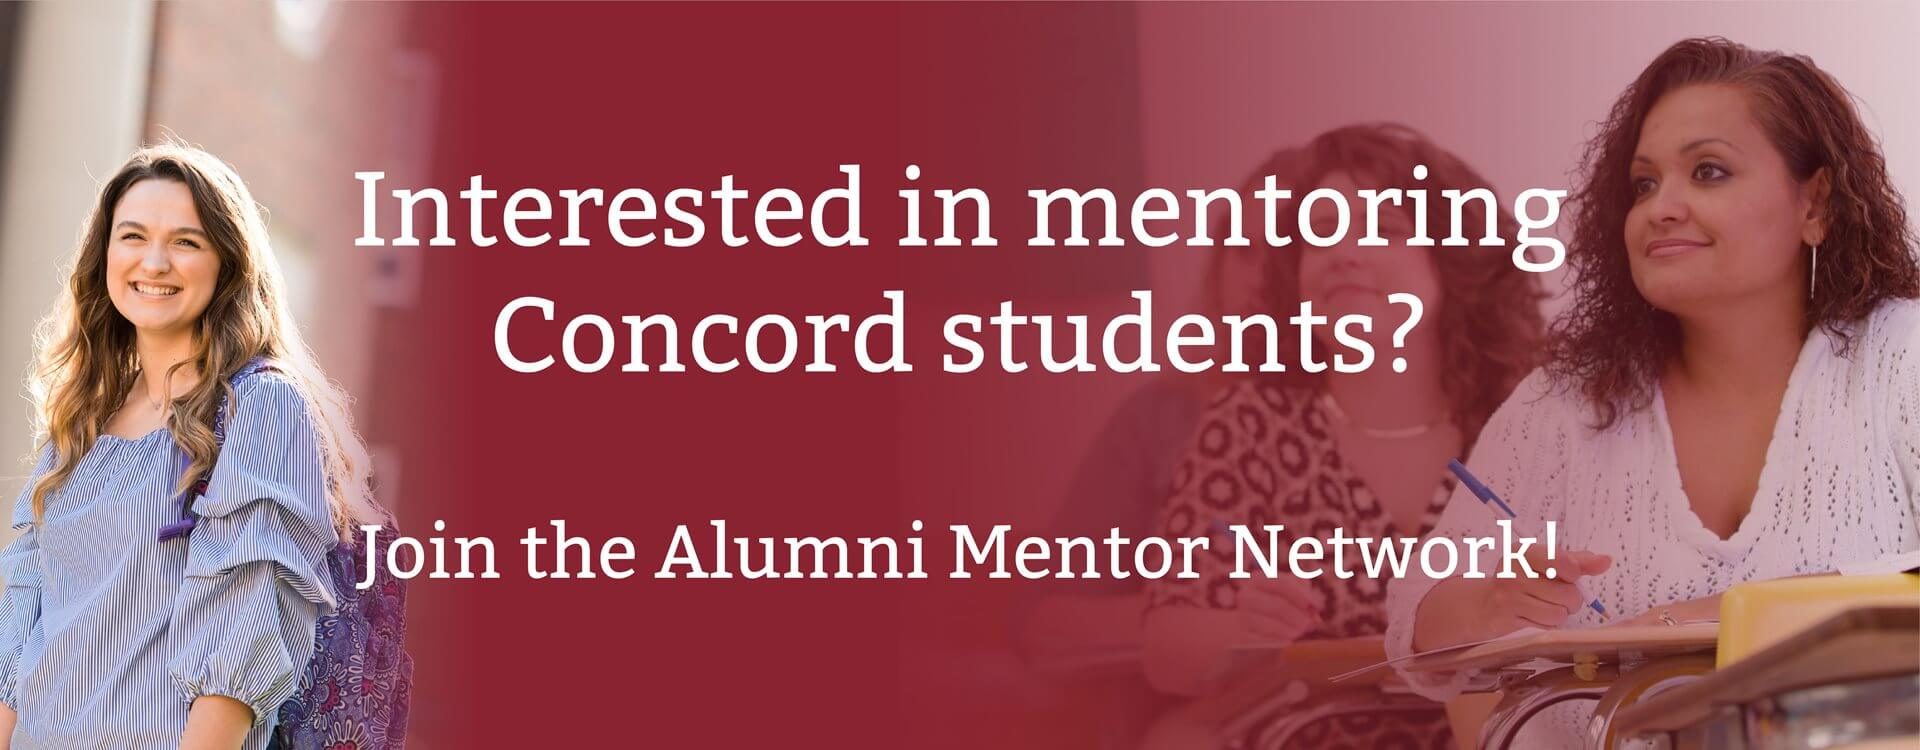 Interested in mentoring Concord students? Join the Alumni Mentor Network!